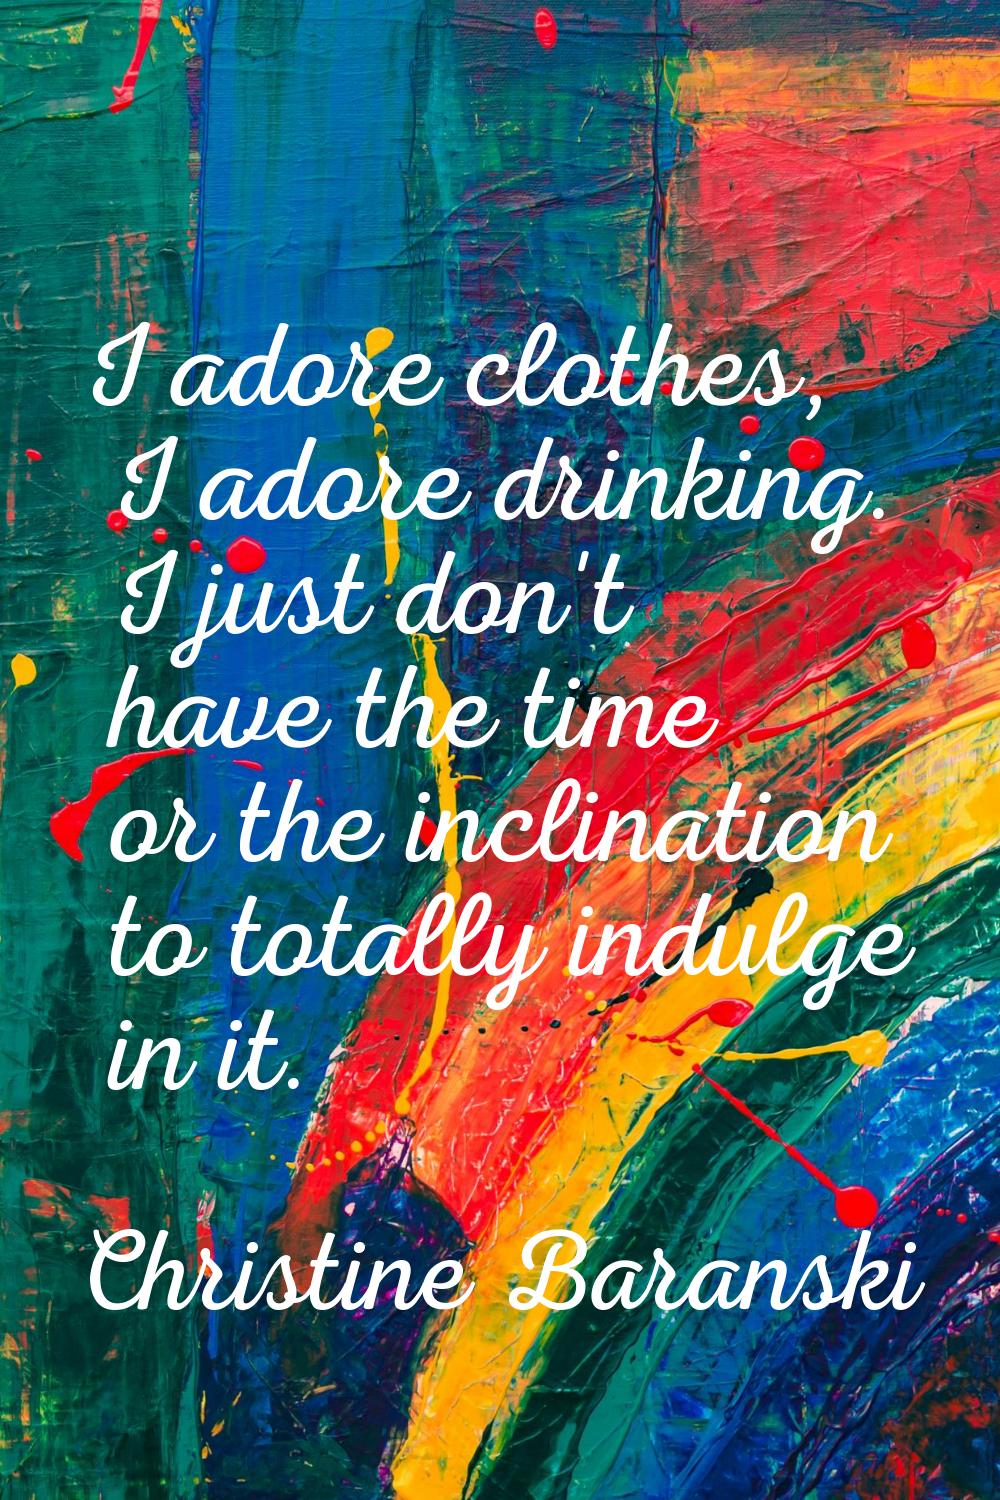 I adore clothes, I adore drinking. I just don't have the time or the inclination to totally indulge